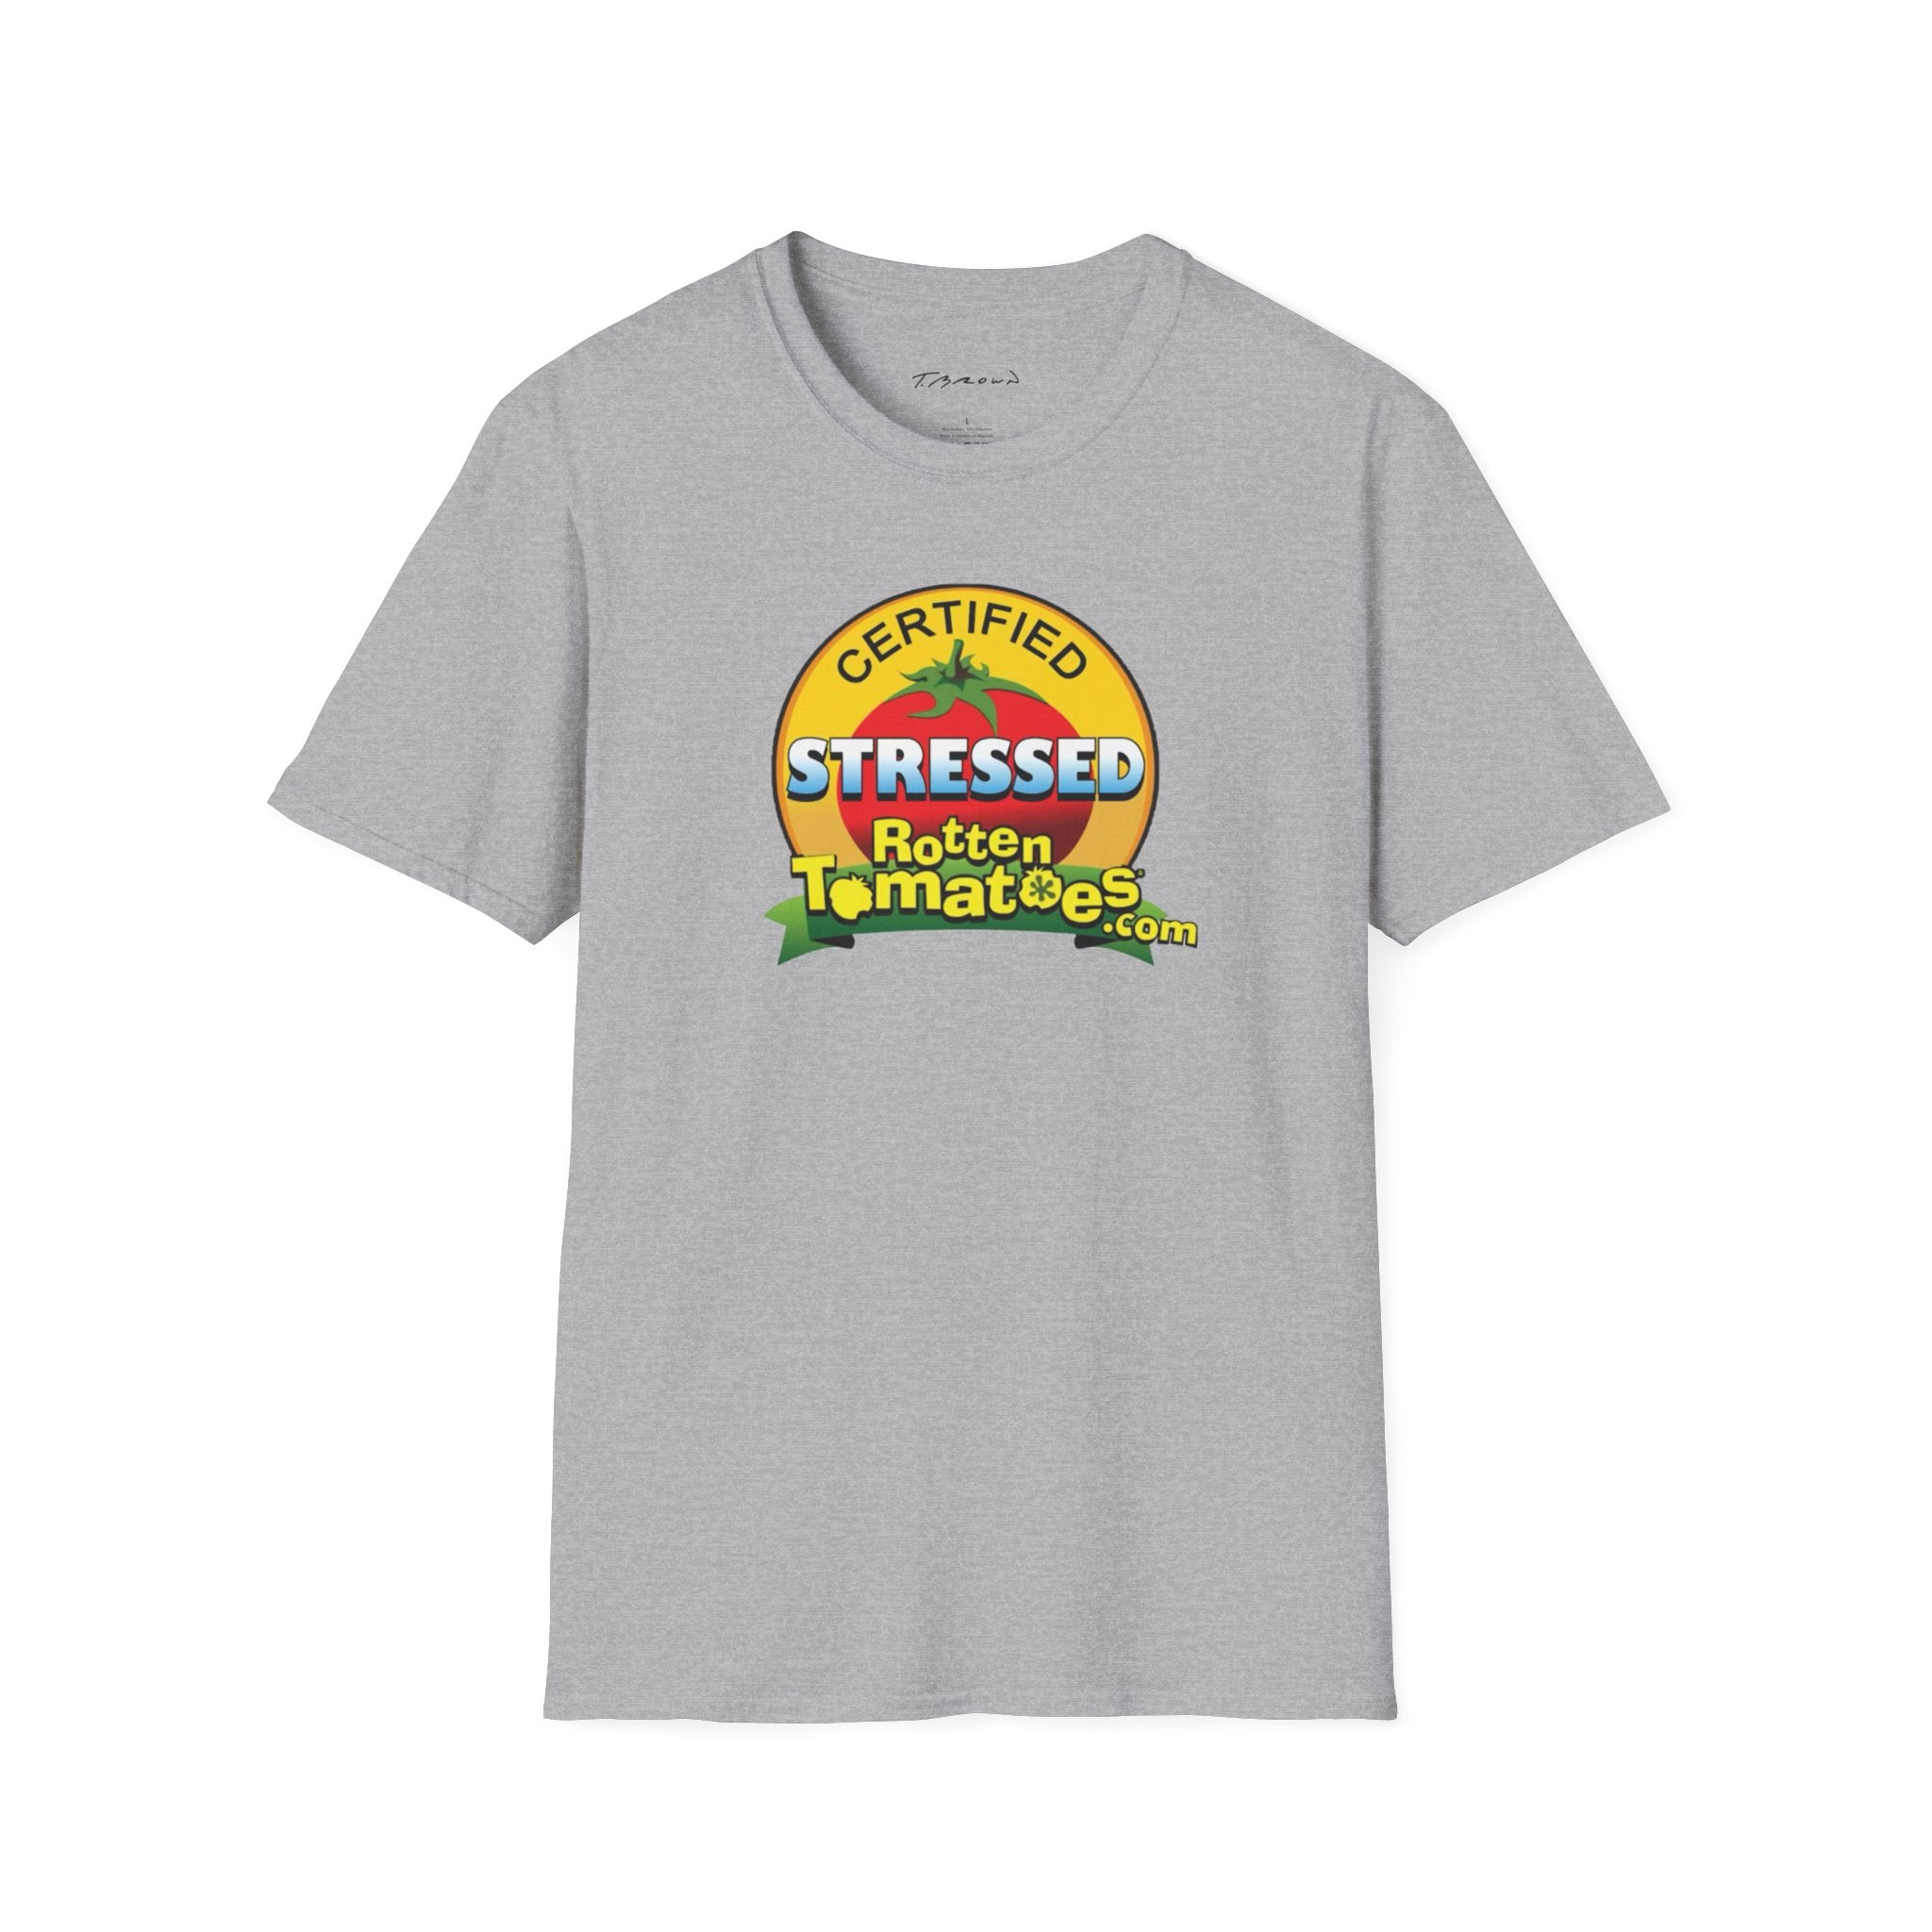 Certified Stressed T-Shirt